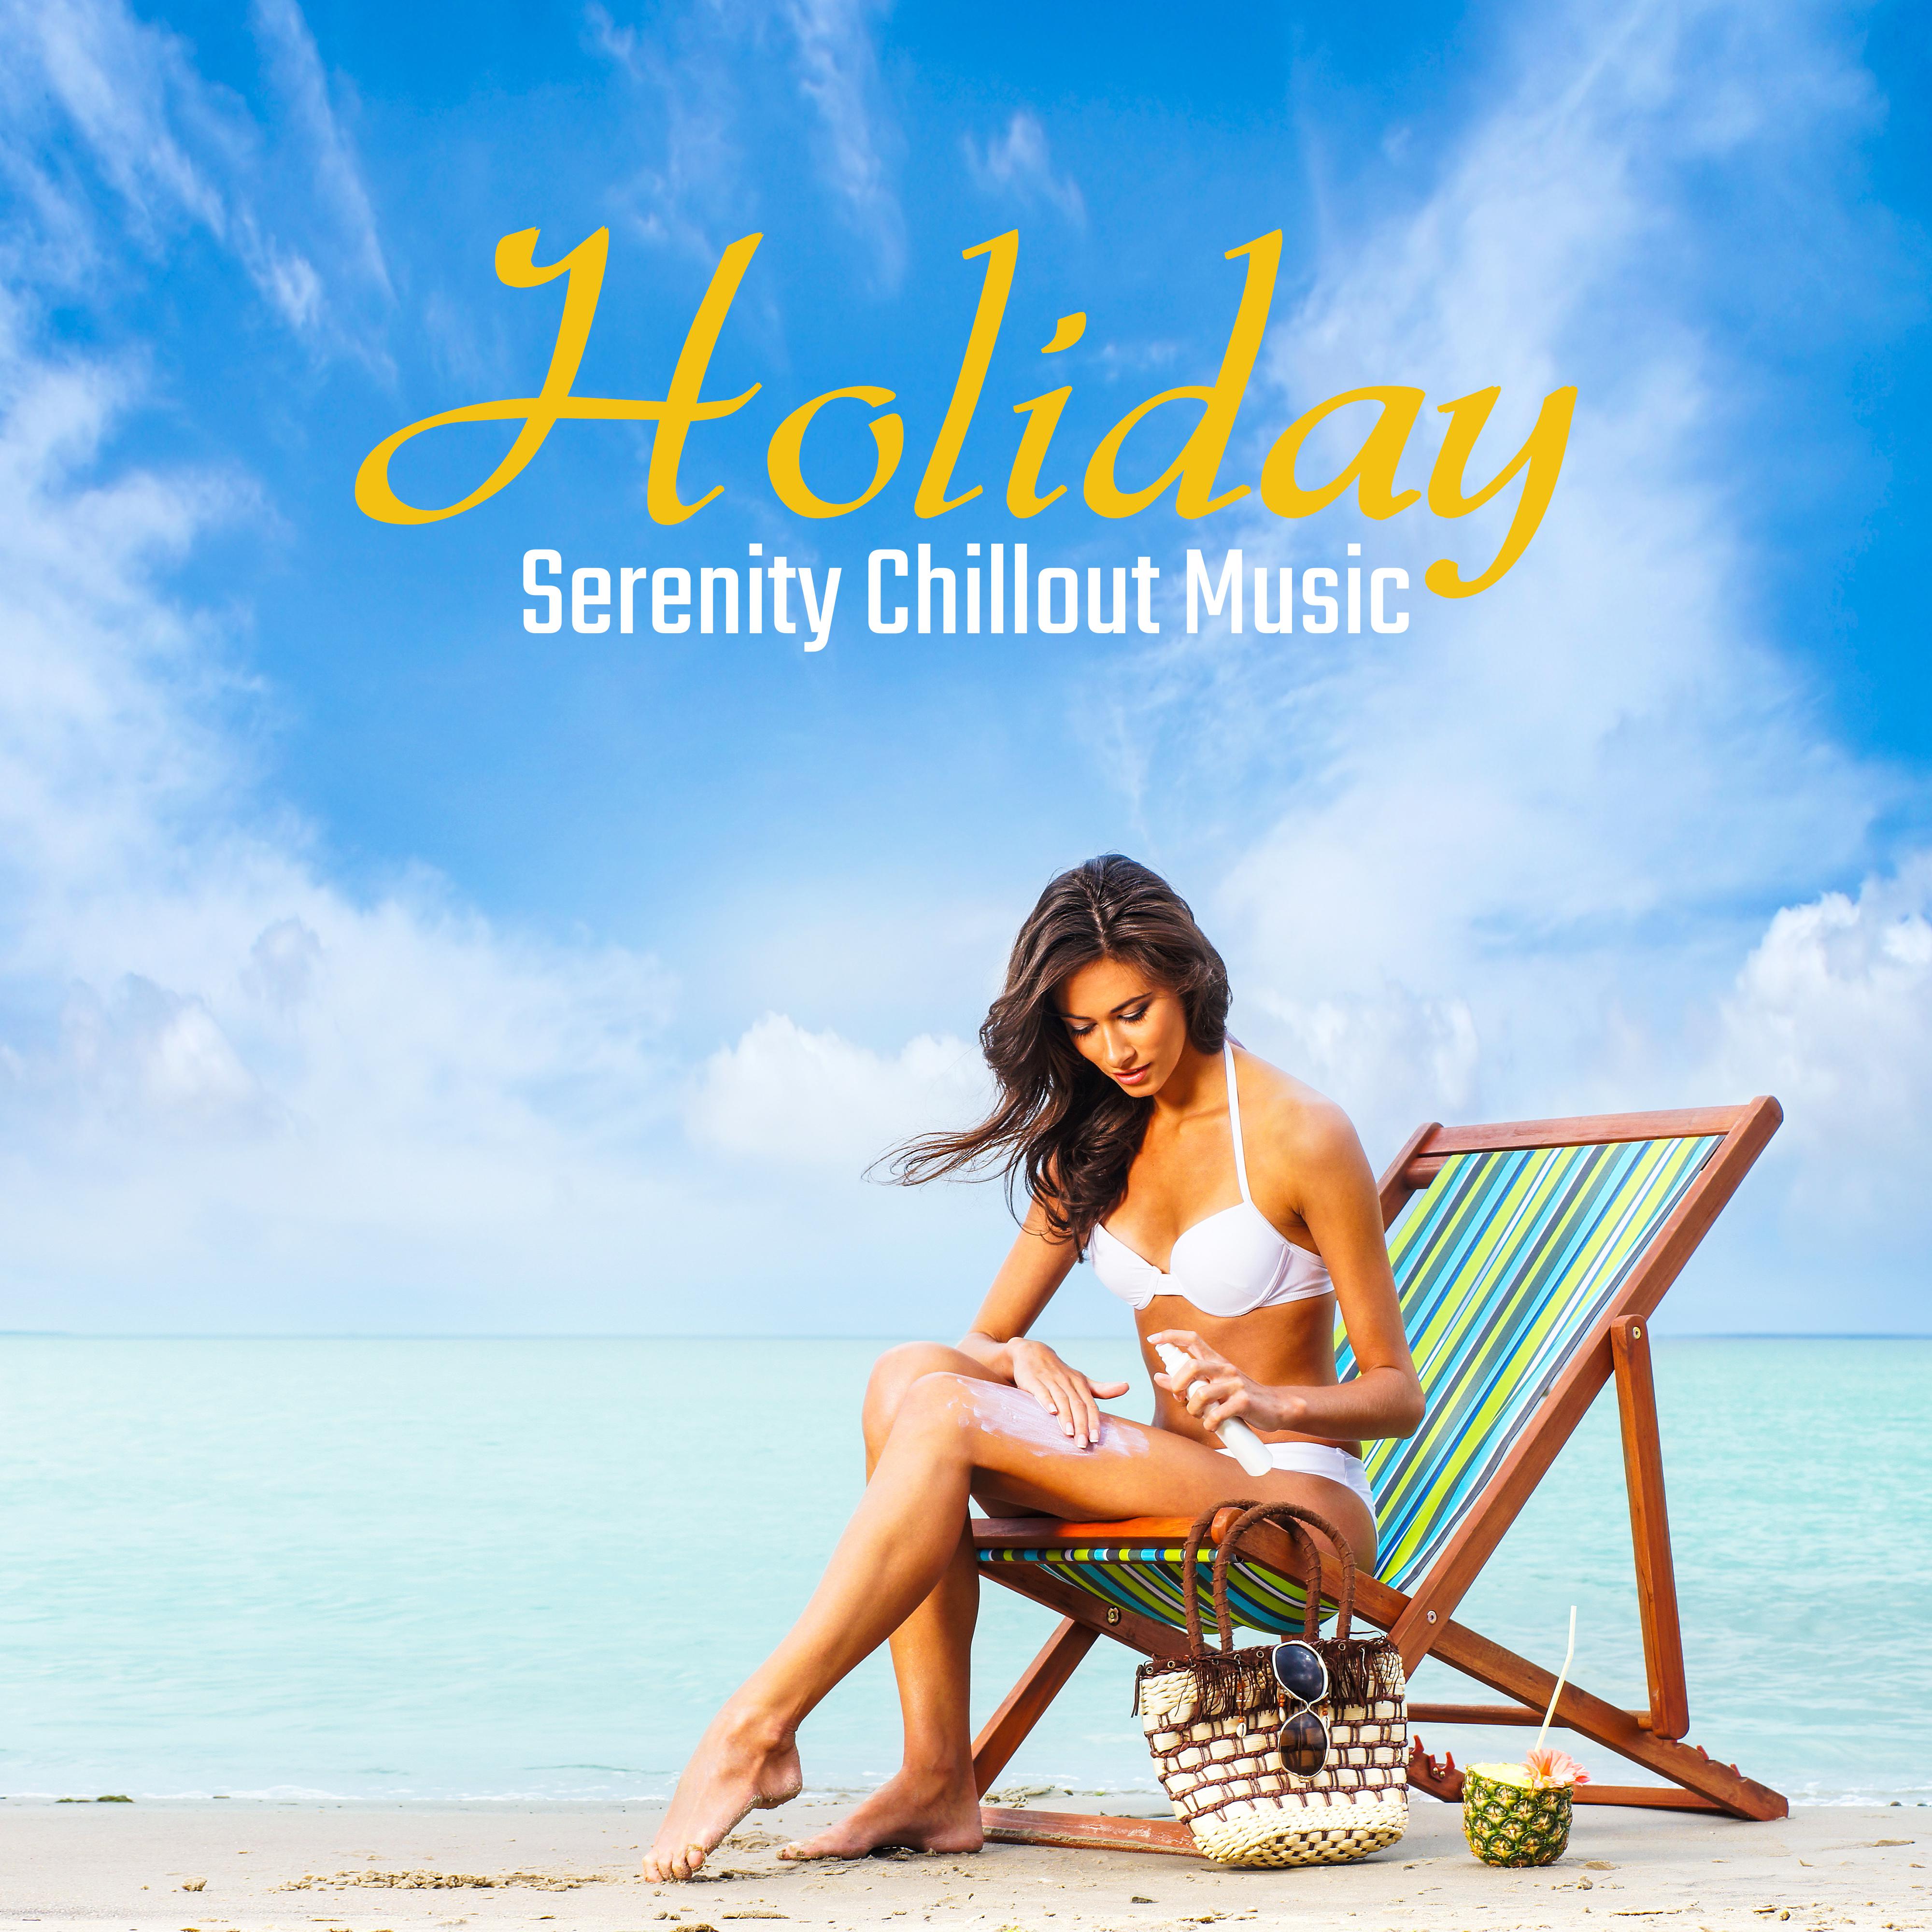 Holiday Serenity Chillout Music: Compilation of Fresh 2019 Chill Out Electronic Deep Vibes, Ibiza Lounge, Tropical Summer Relaxation, Ambient Sunset Songs